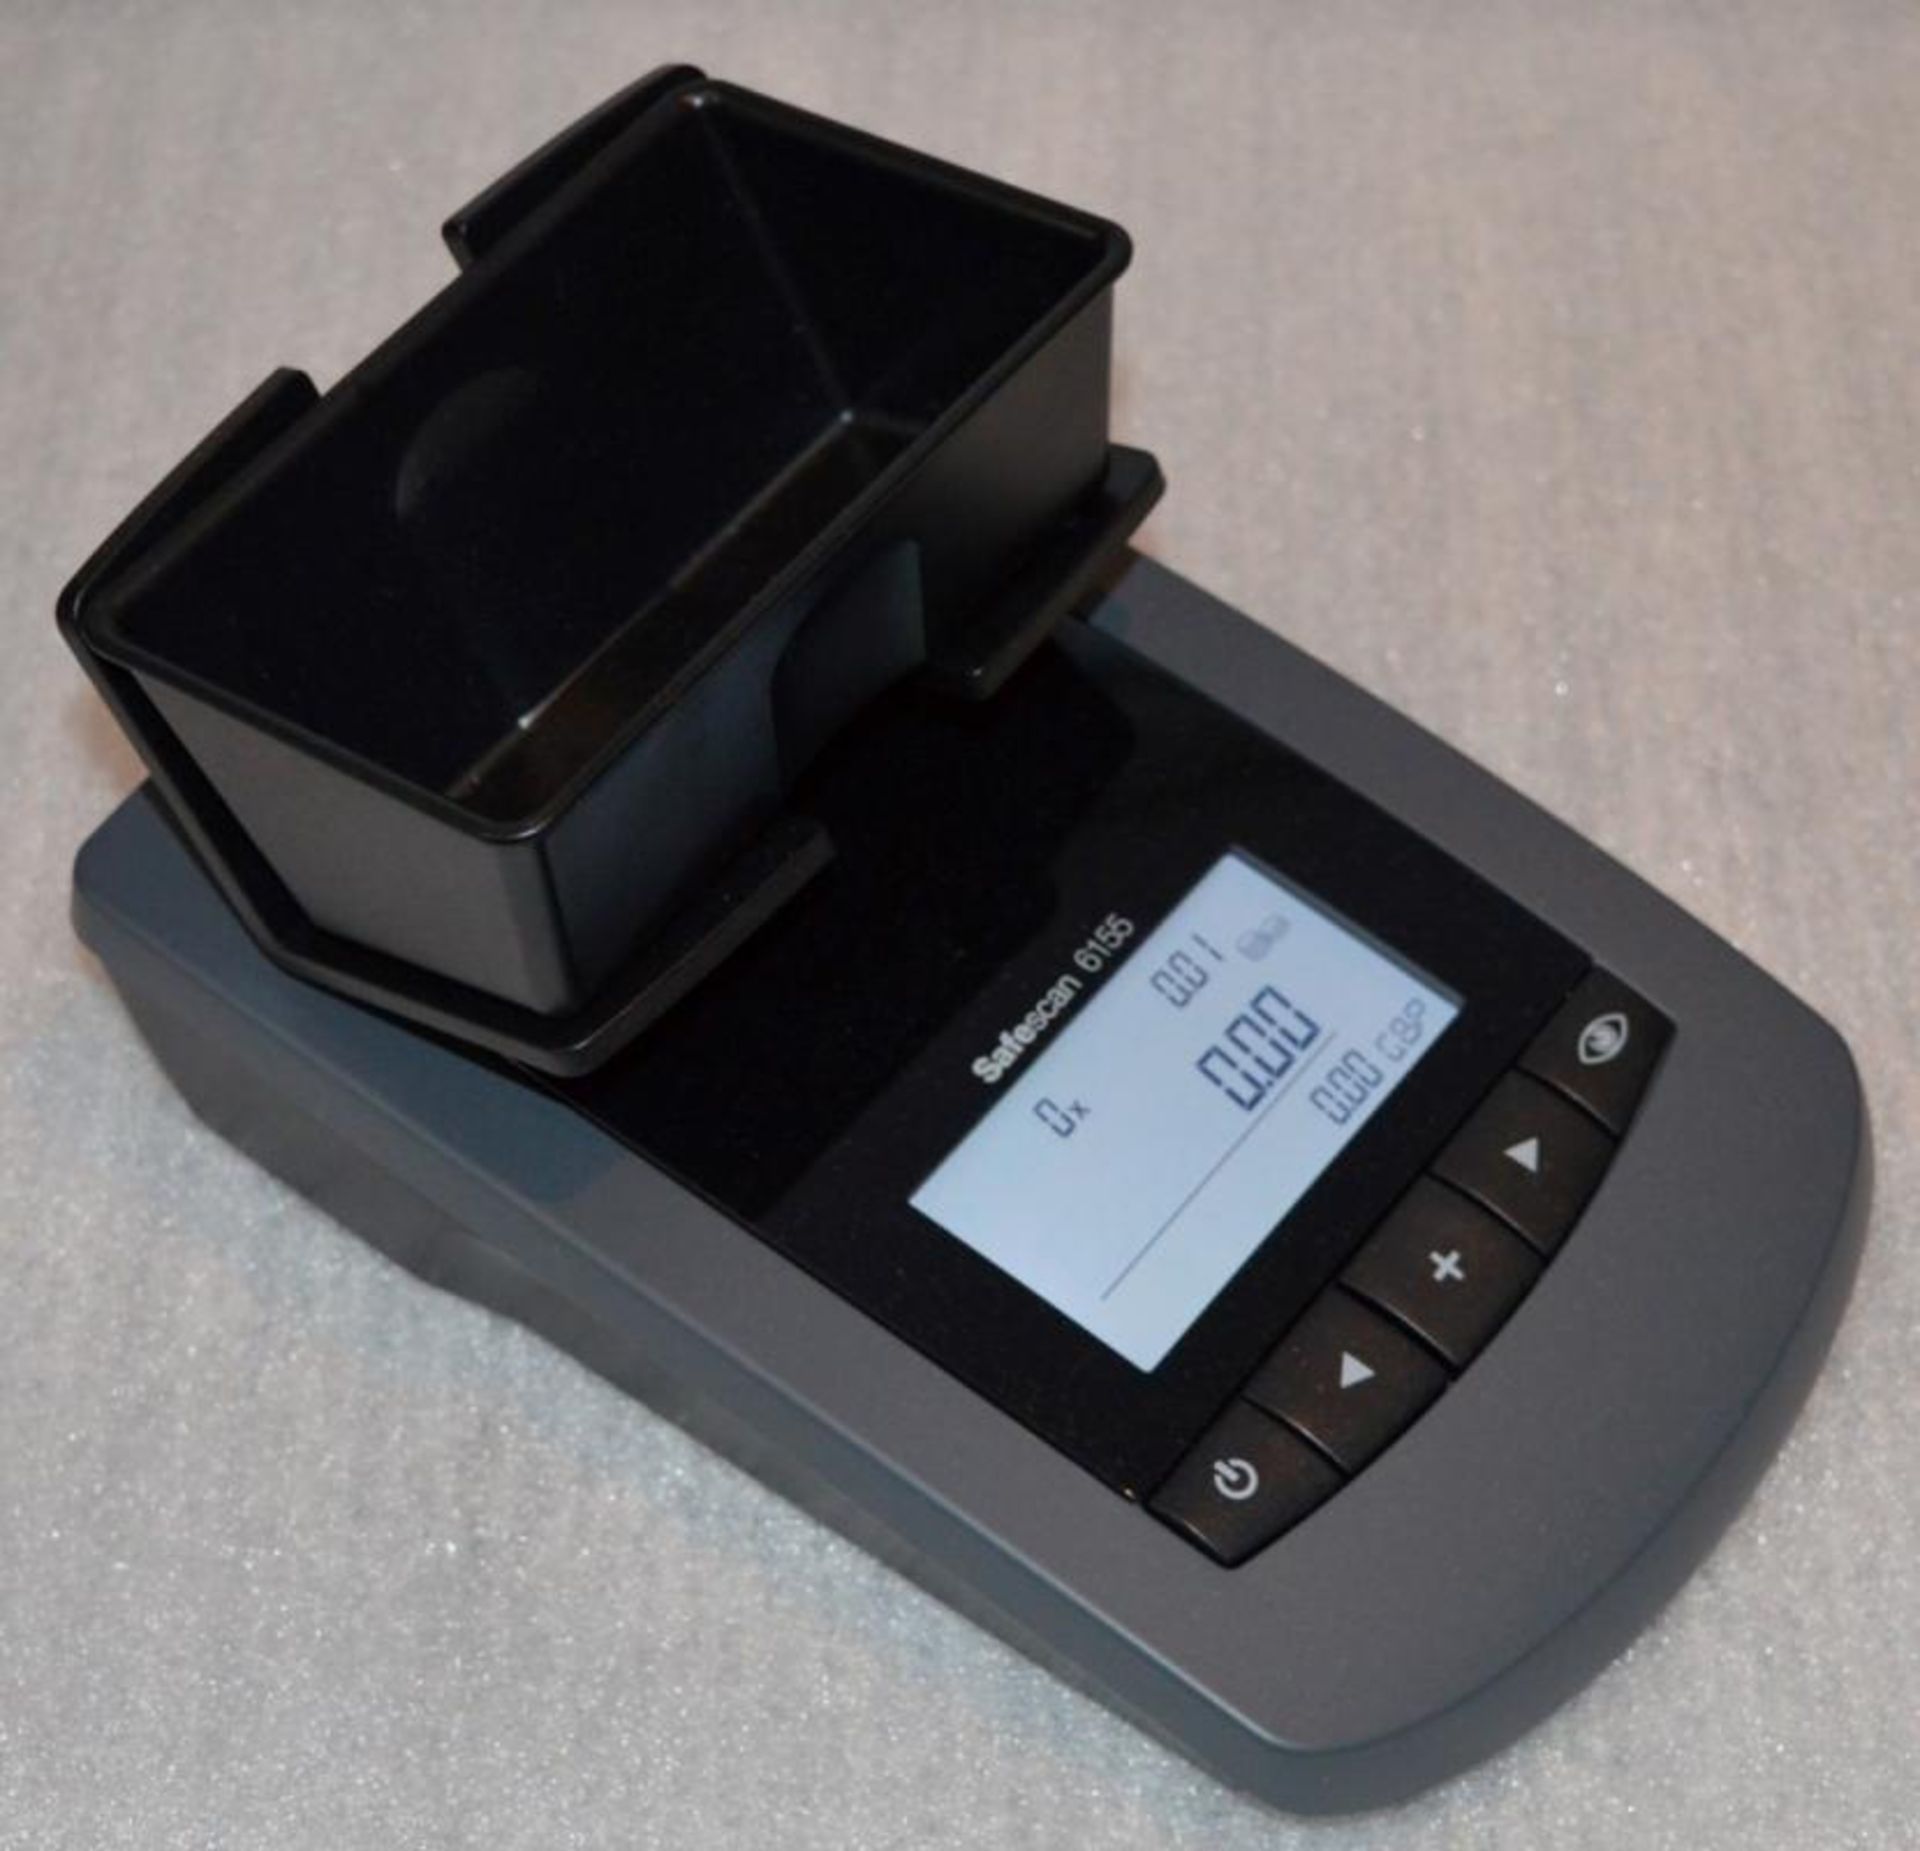 1 x SafeScan 6155 Coin and Bank Note Counter - Includes Coin and Note Trays, Box, Instructions and - Image 8 of 10